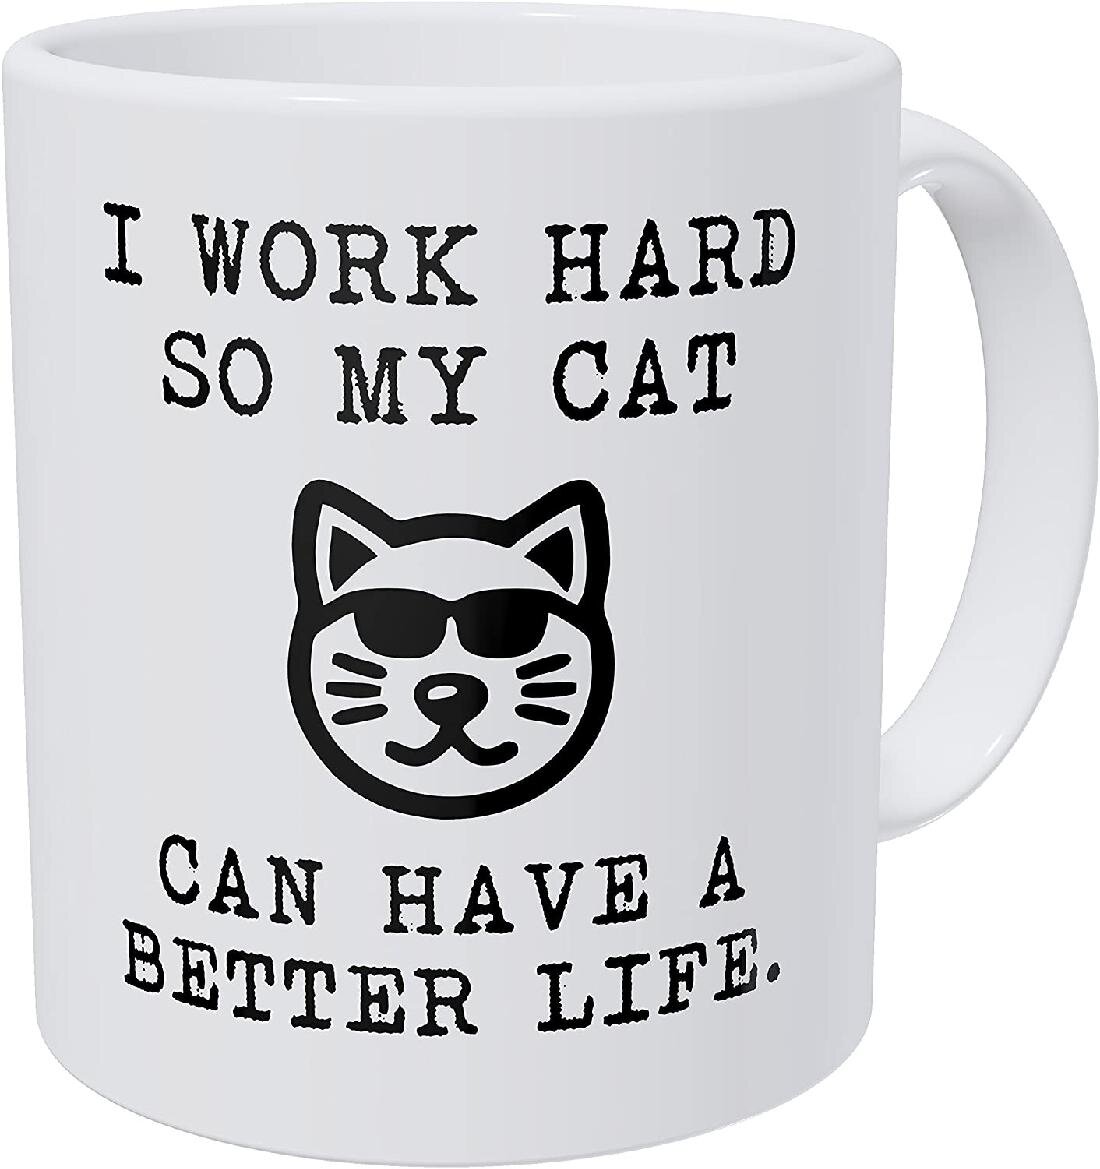 Mom, Funny Mug White 11 Oz Coffee Great Novelty Gift For Lovers I Love Cats 